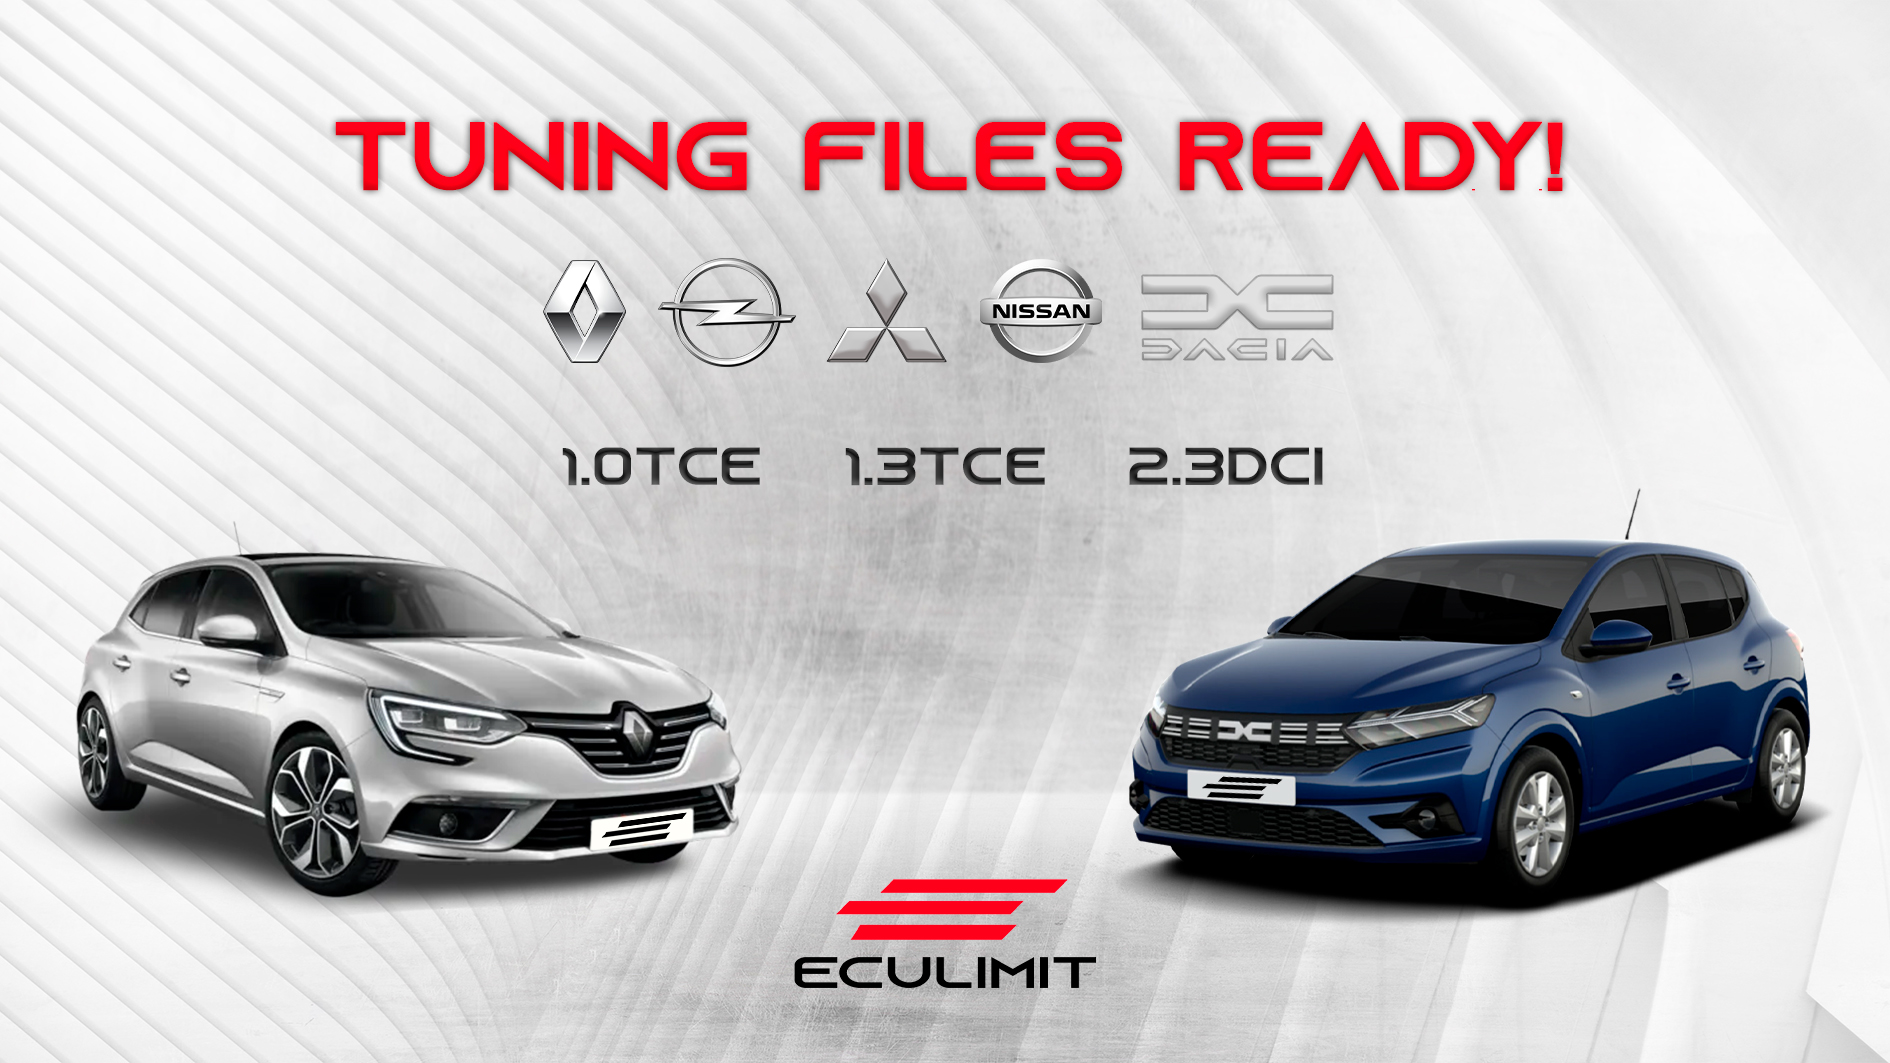 Tuning files ready – 1.0TCE / 1.3TCE / 2.3DCI